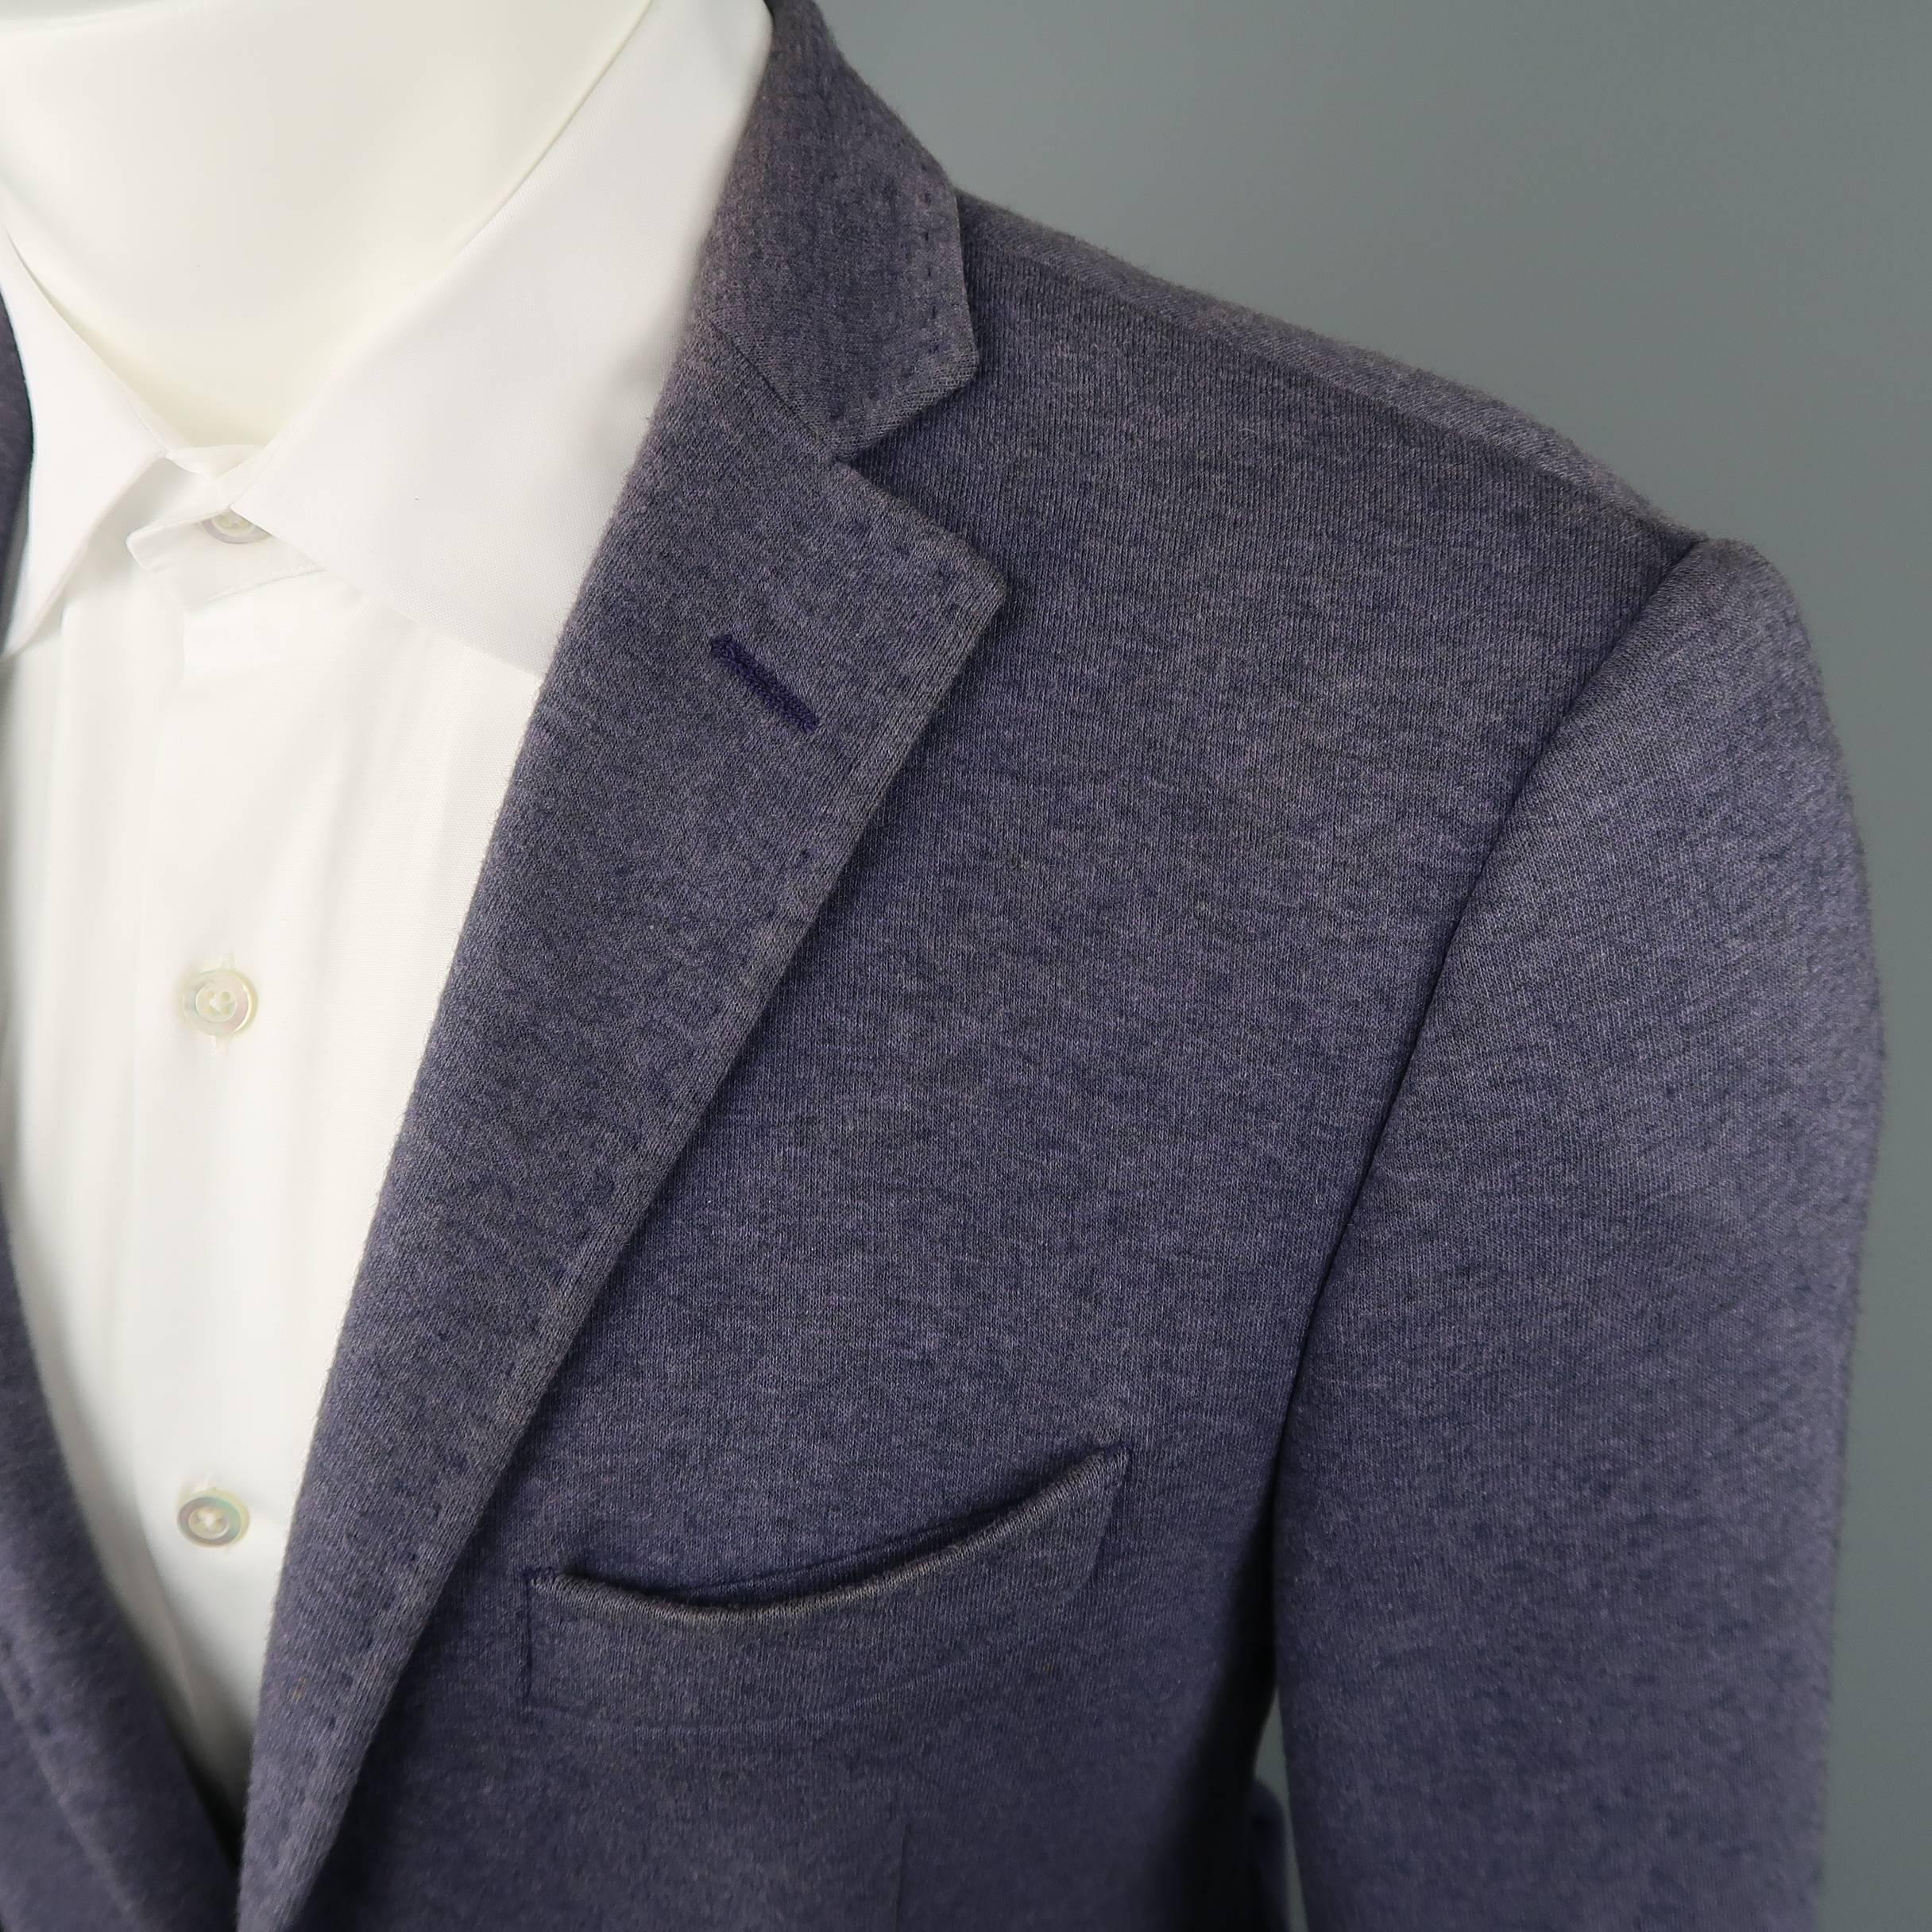 Single breasted ETRO sport coat comes in a navy blue textured mohair wool blend fabric with a two button closure, functional button cuffs , faille piping throughout, and paisley print silk liner.  Made in Italy.
 
Excellent Pre-Owned